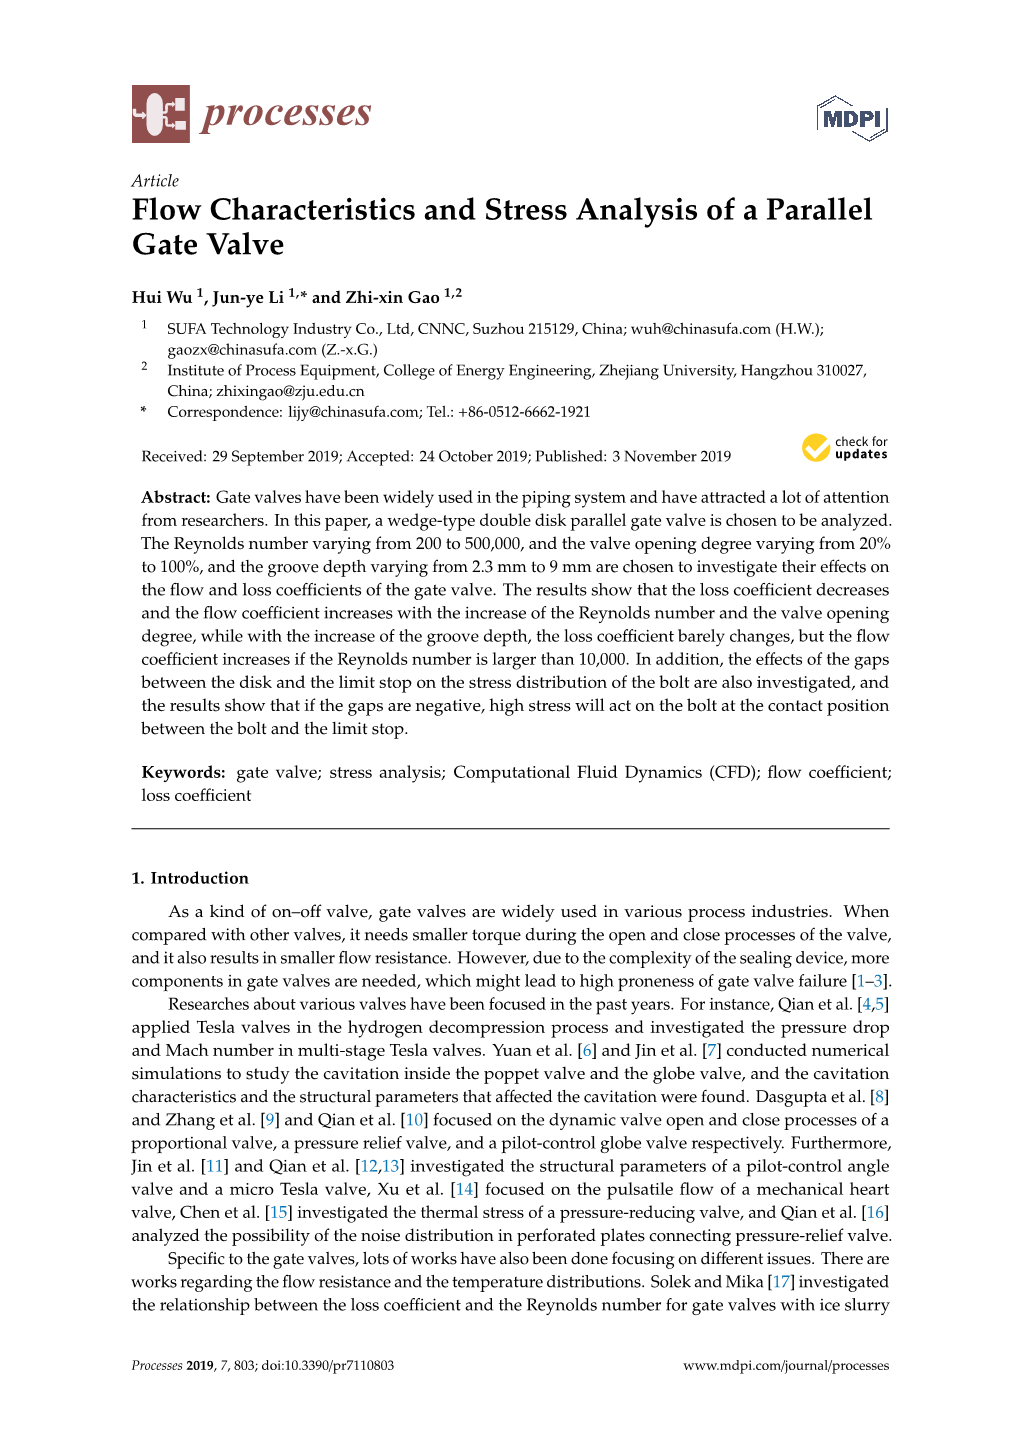 Flow Characteristics and Stress Analysis of a Parallel Gate Valve